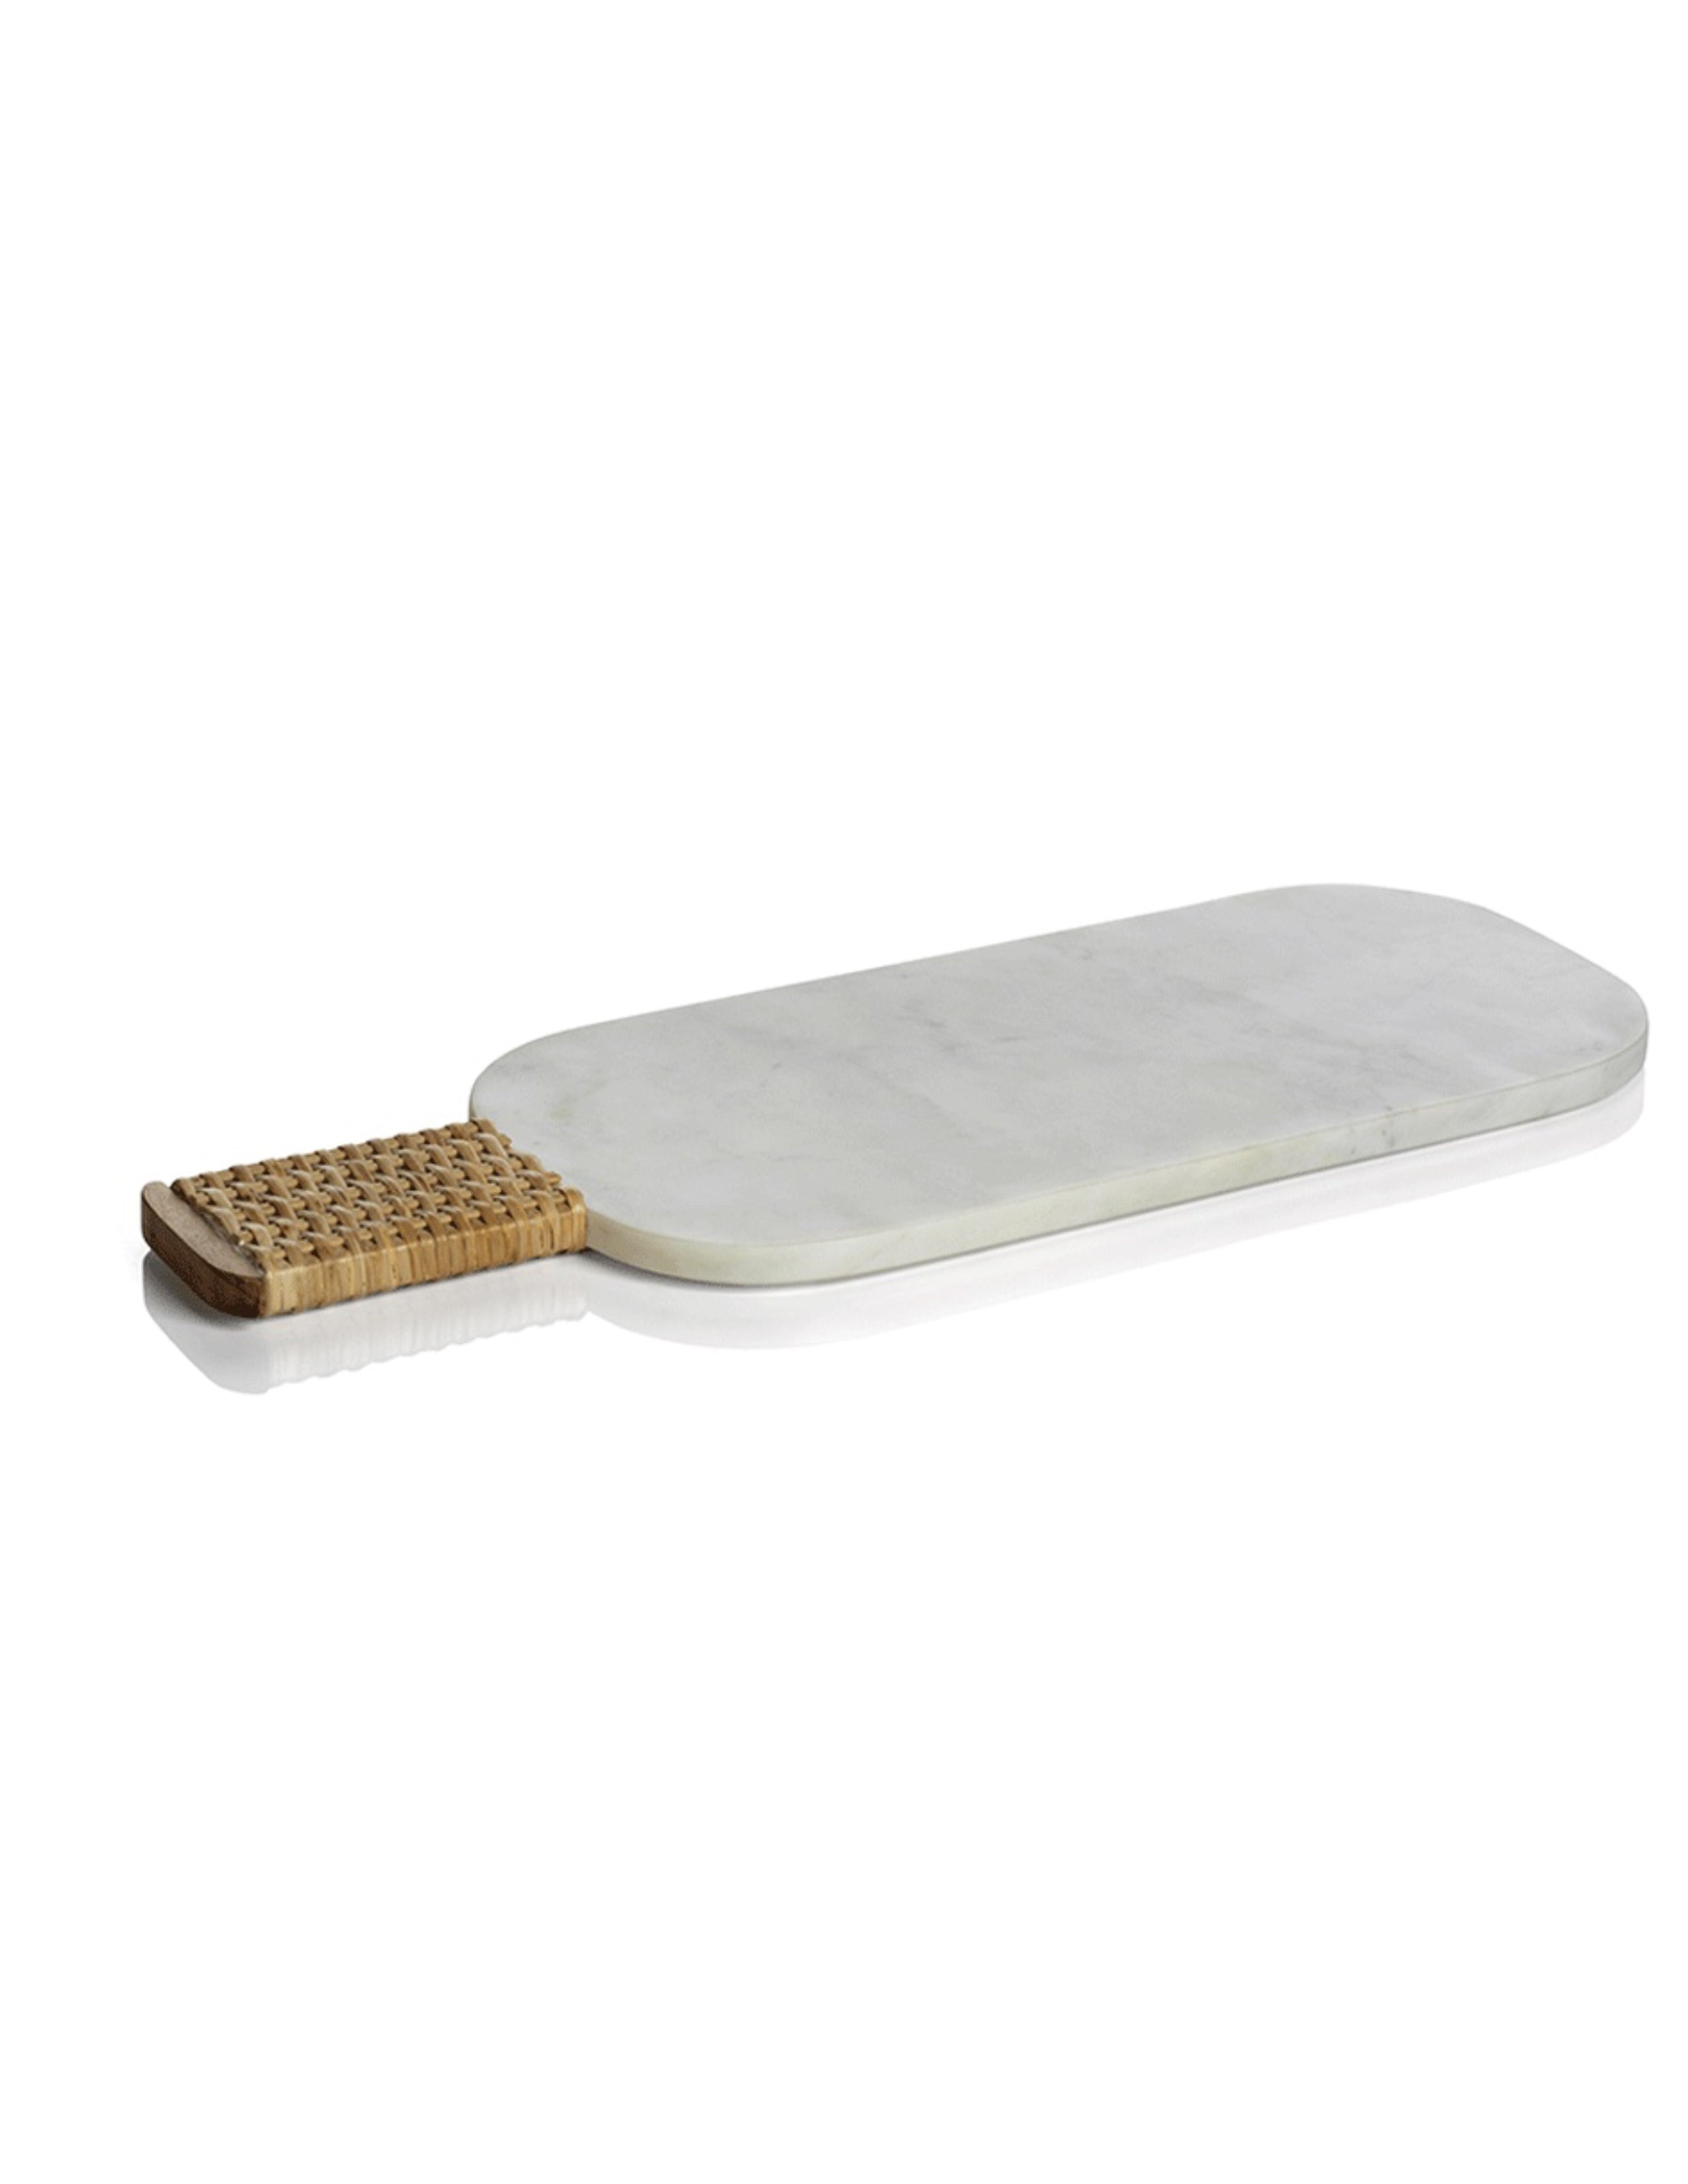 Marble Cheese & Charcuterie Board w/ Woven Cane Handle